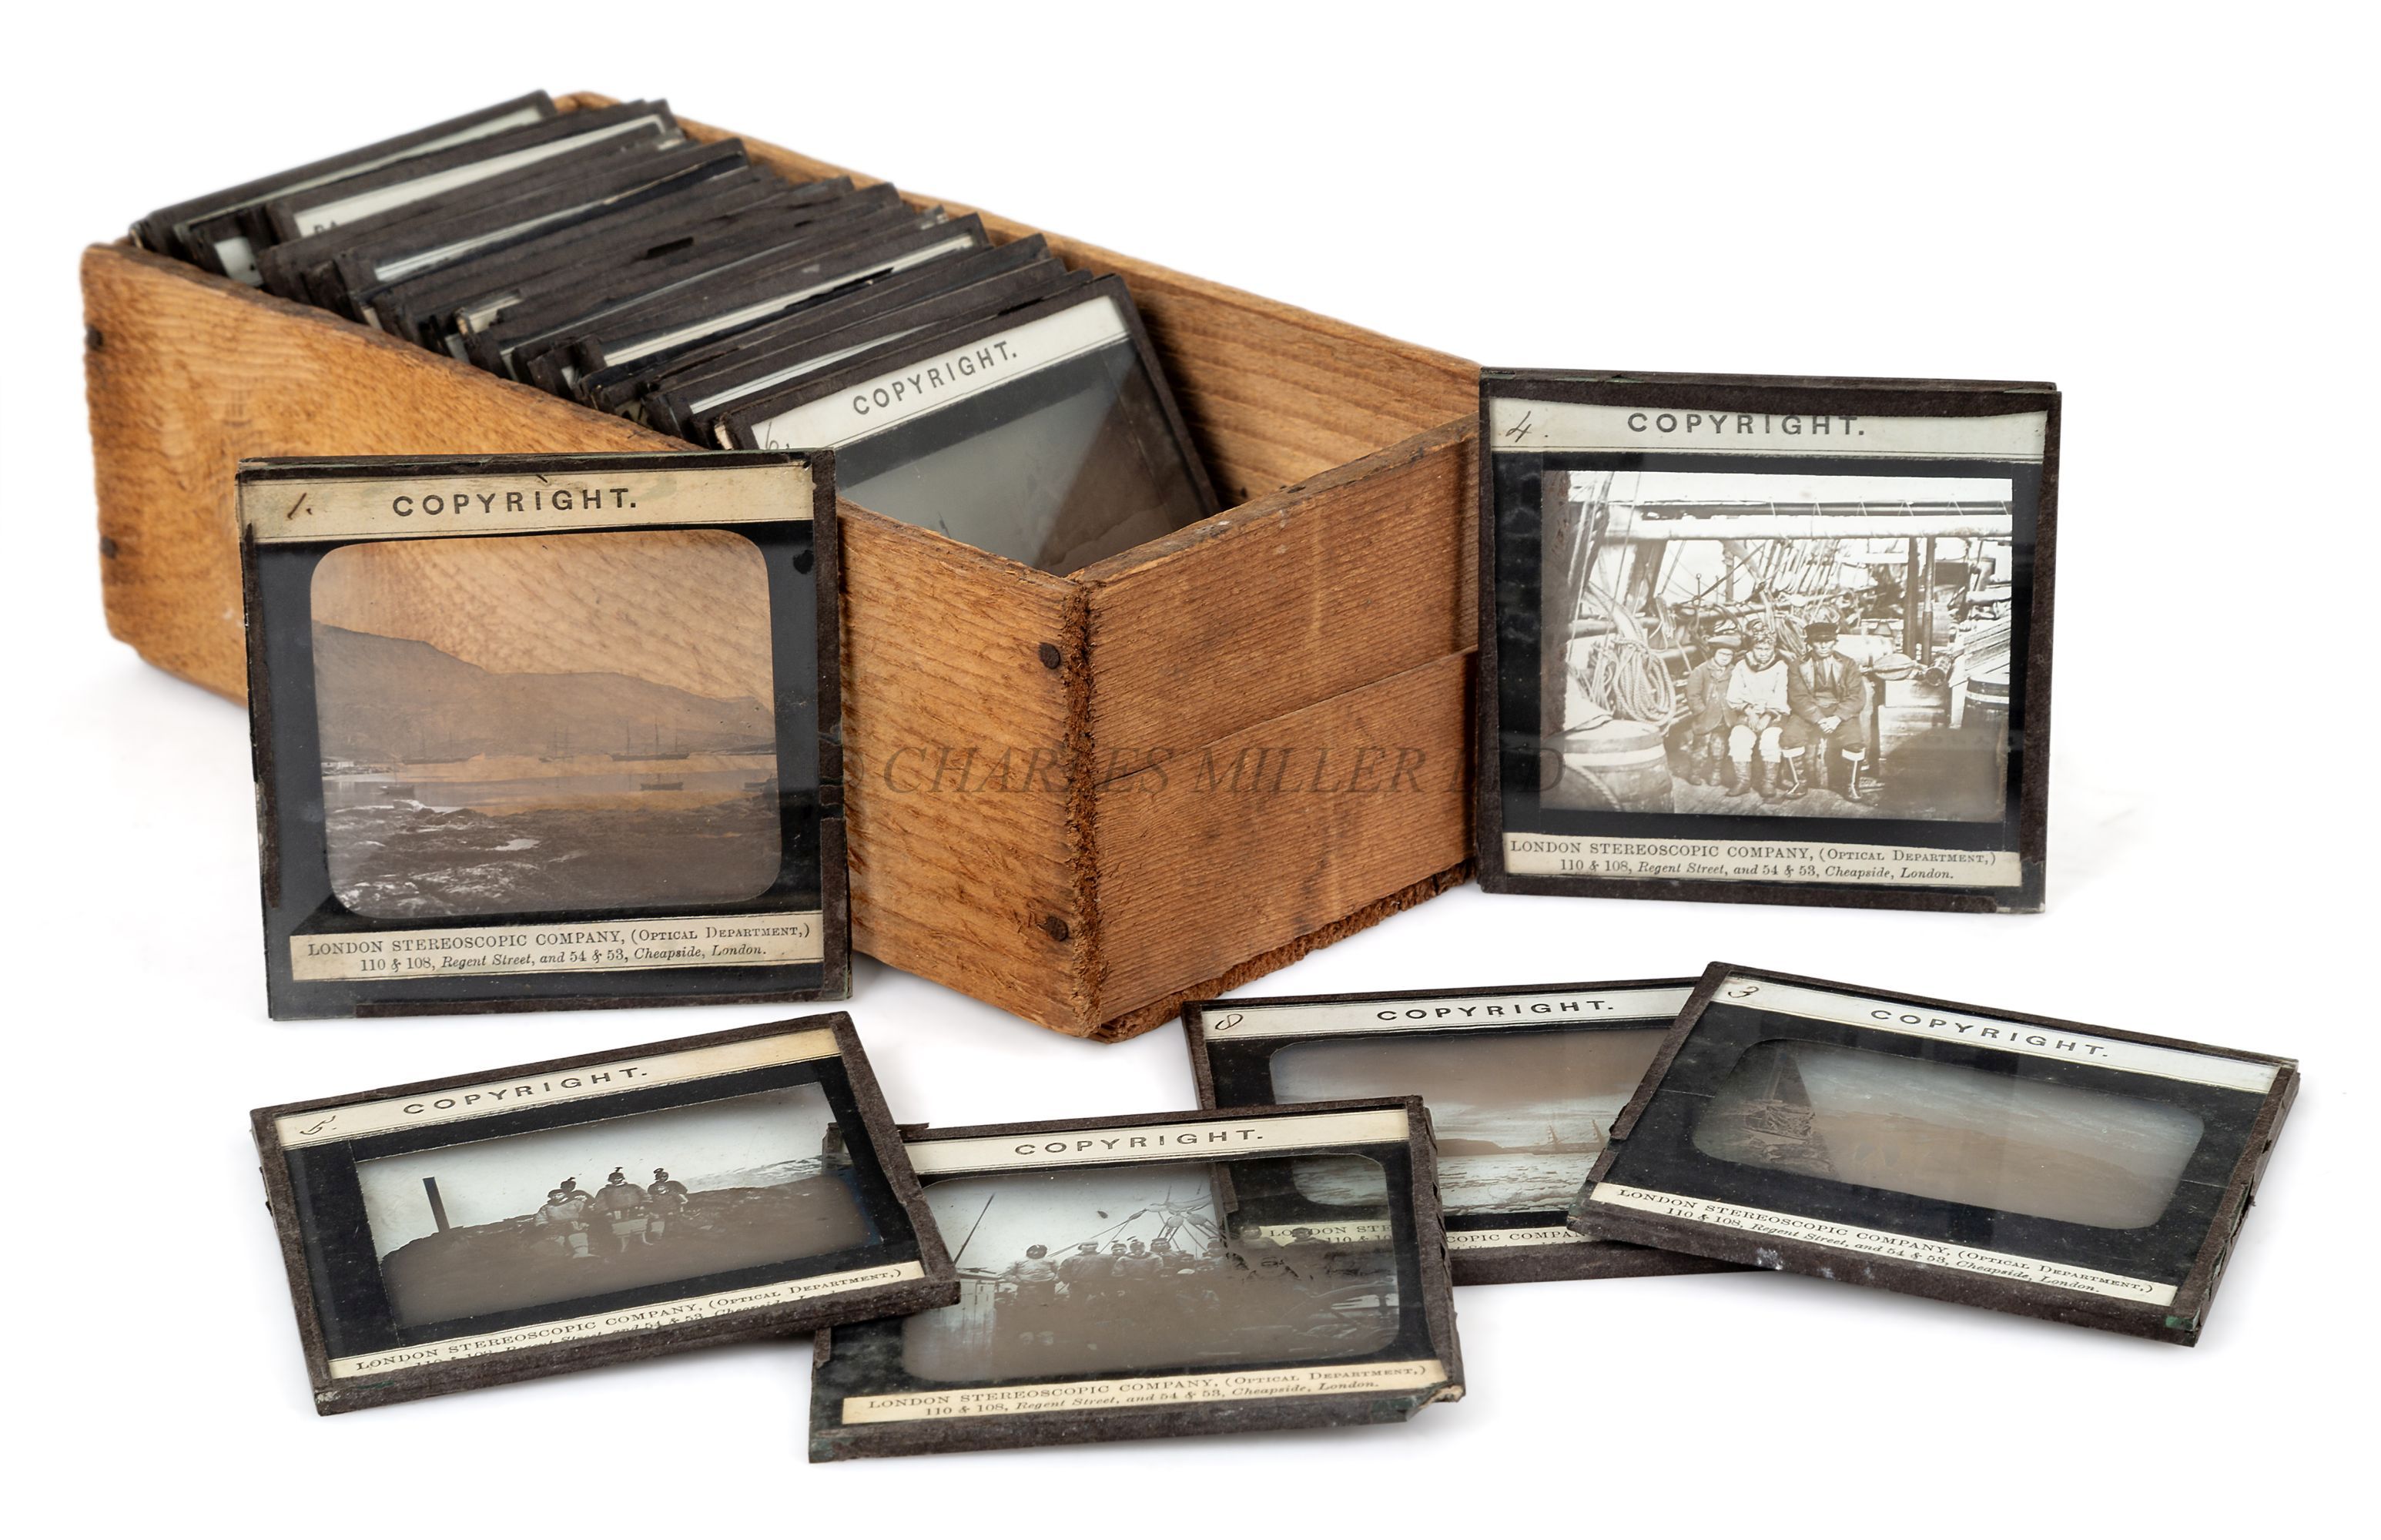 BRITISH ARCTIC EXPEDITION, 1875-76, A RARE GROUP OF PHOTOGRAPHIC SLIDES